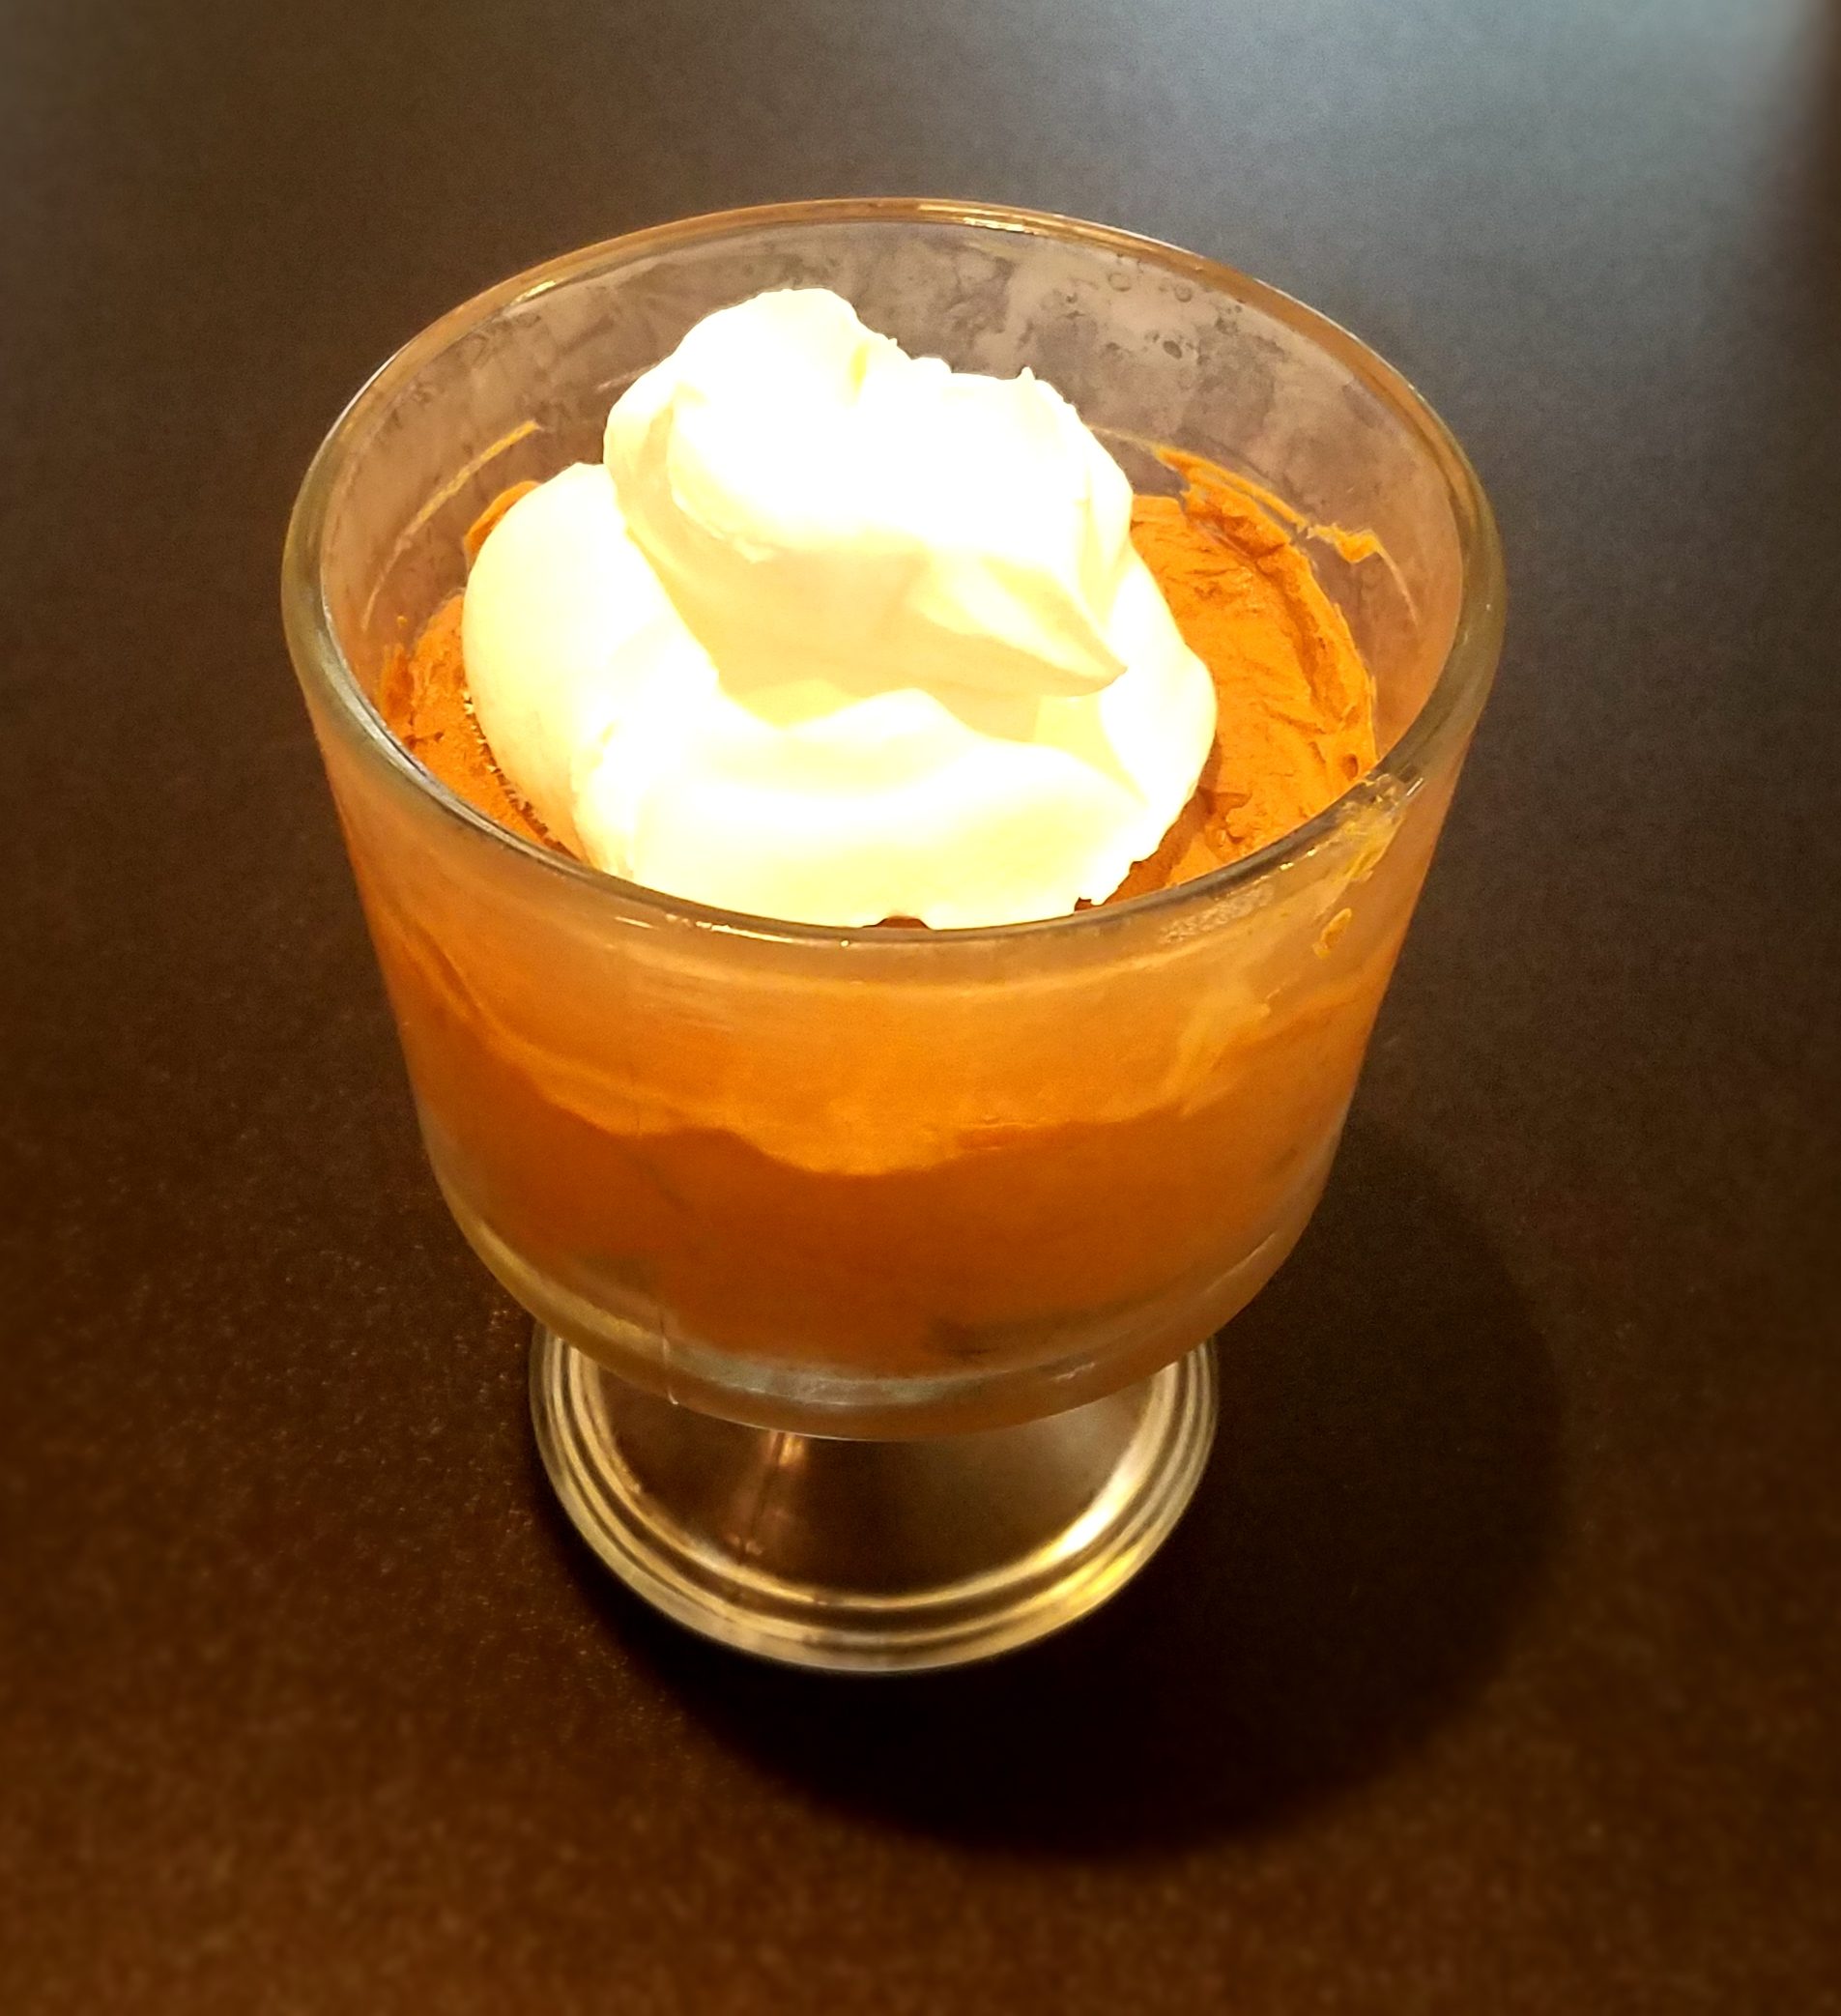 espresso chocolate mousse with whipped cream